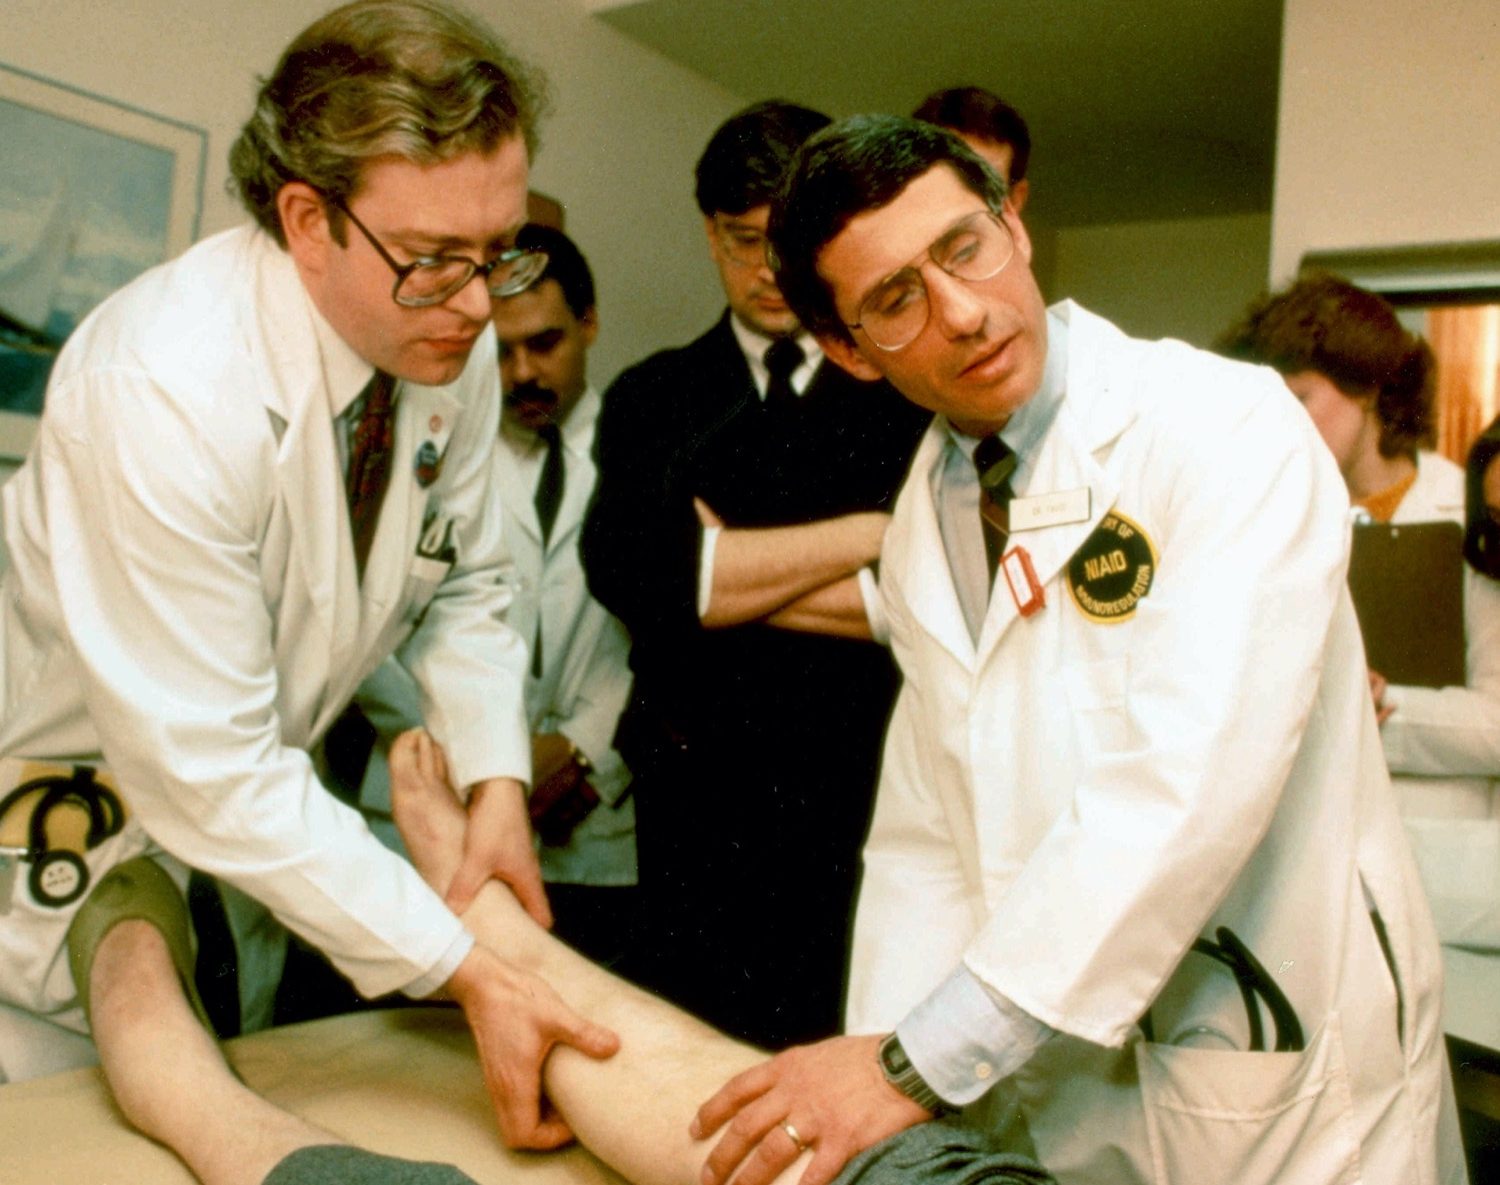 two male doctors in lab coats lift up a patients leg in an examine